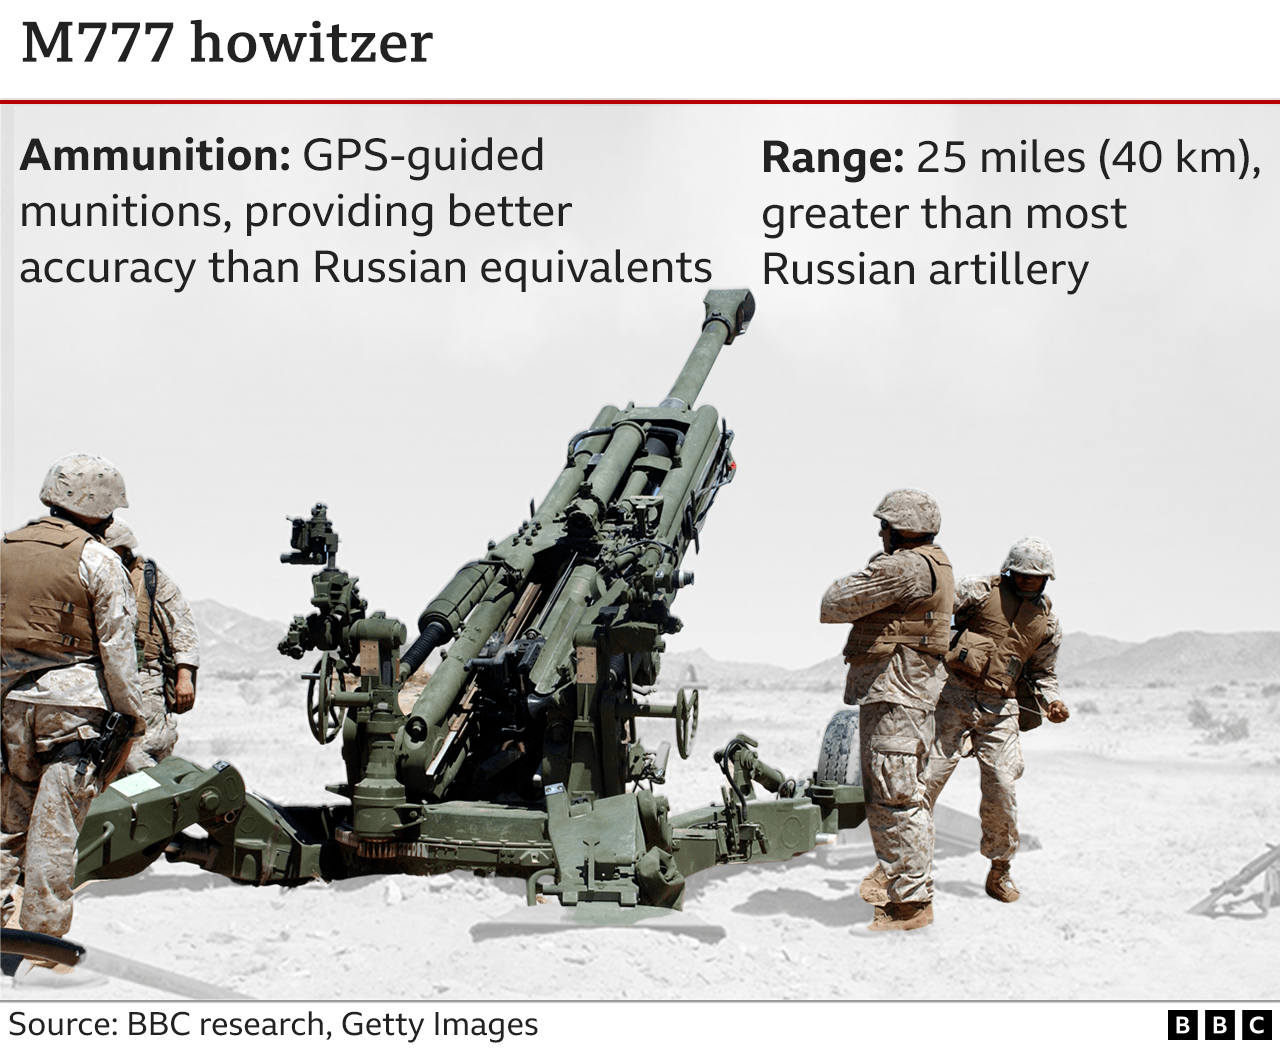 Graphic showing the characteristics of the M777 artillery system. The M777 howitzer has greater range and better accuracy than Russian equivalents when using GPS-guided munitions.